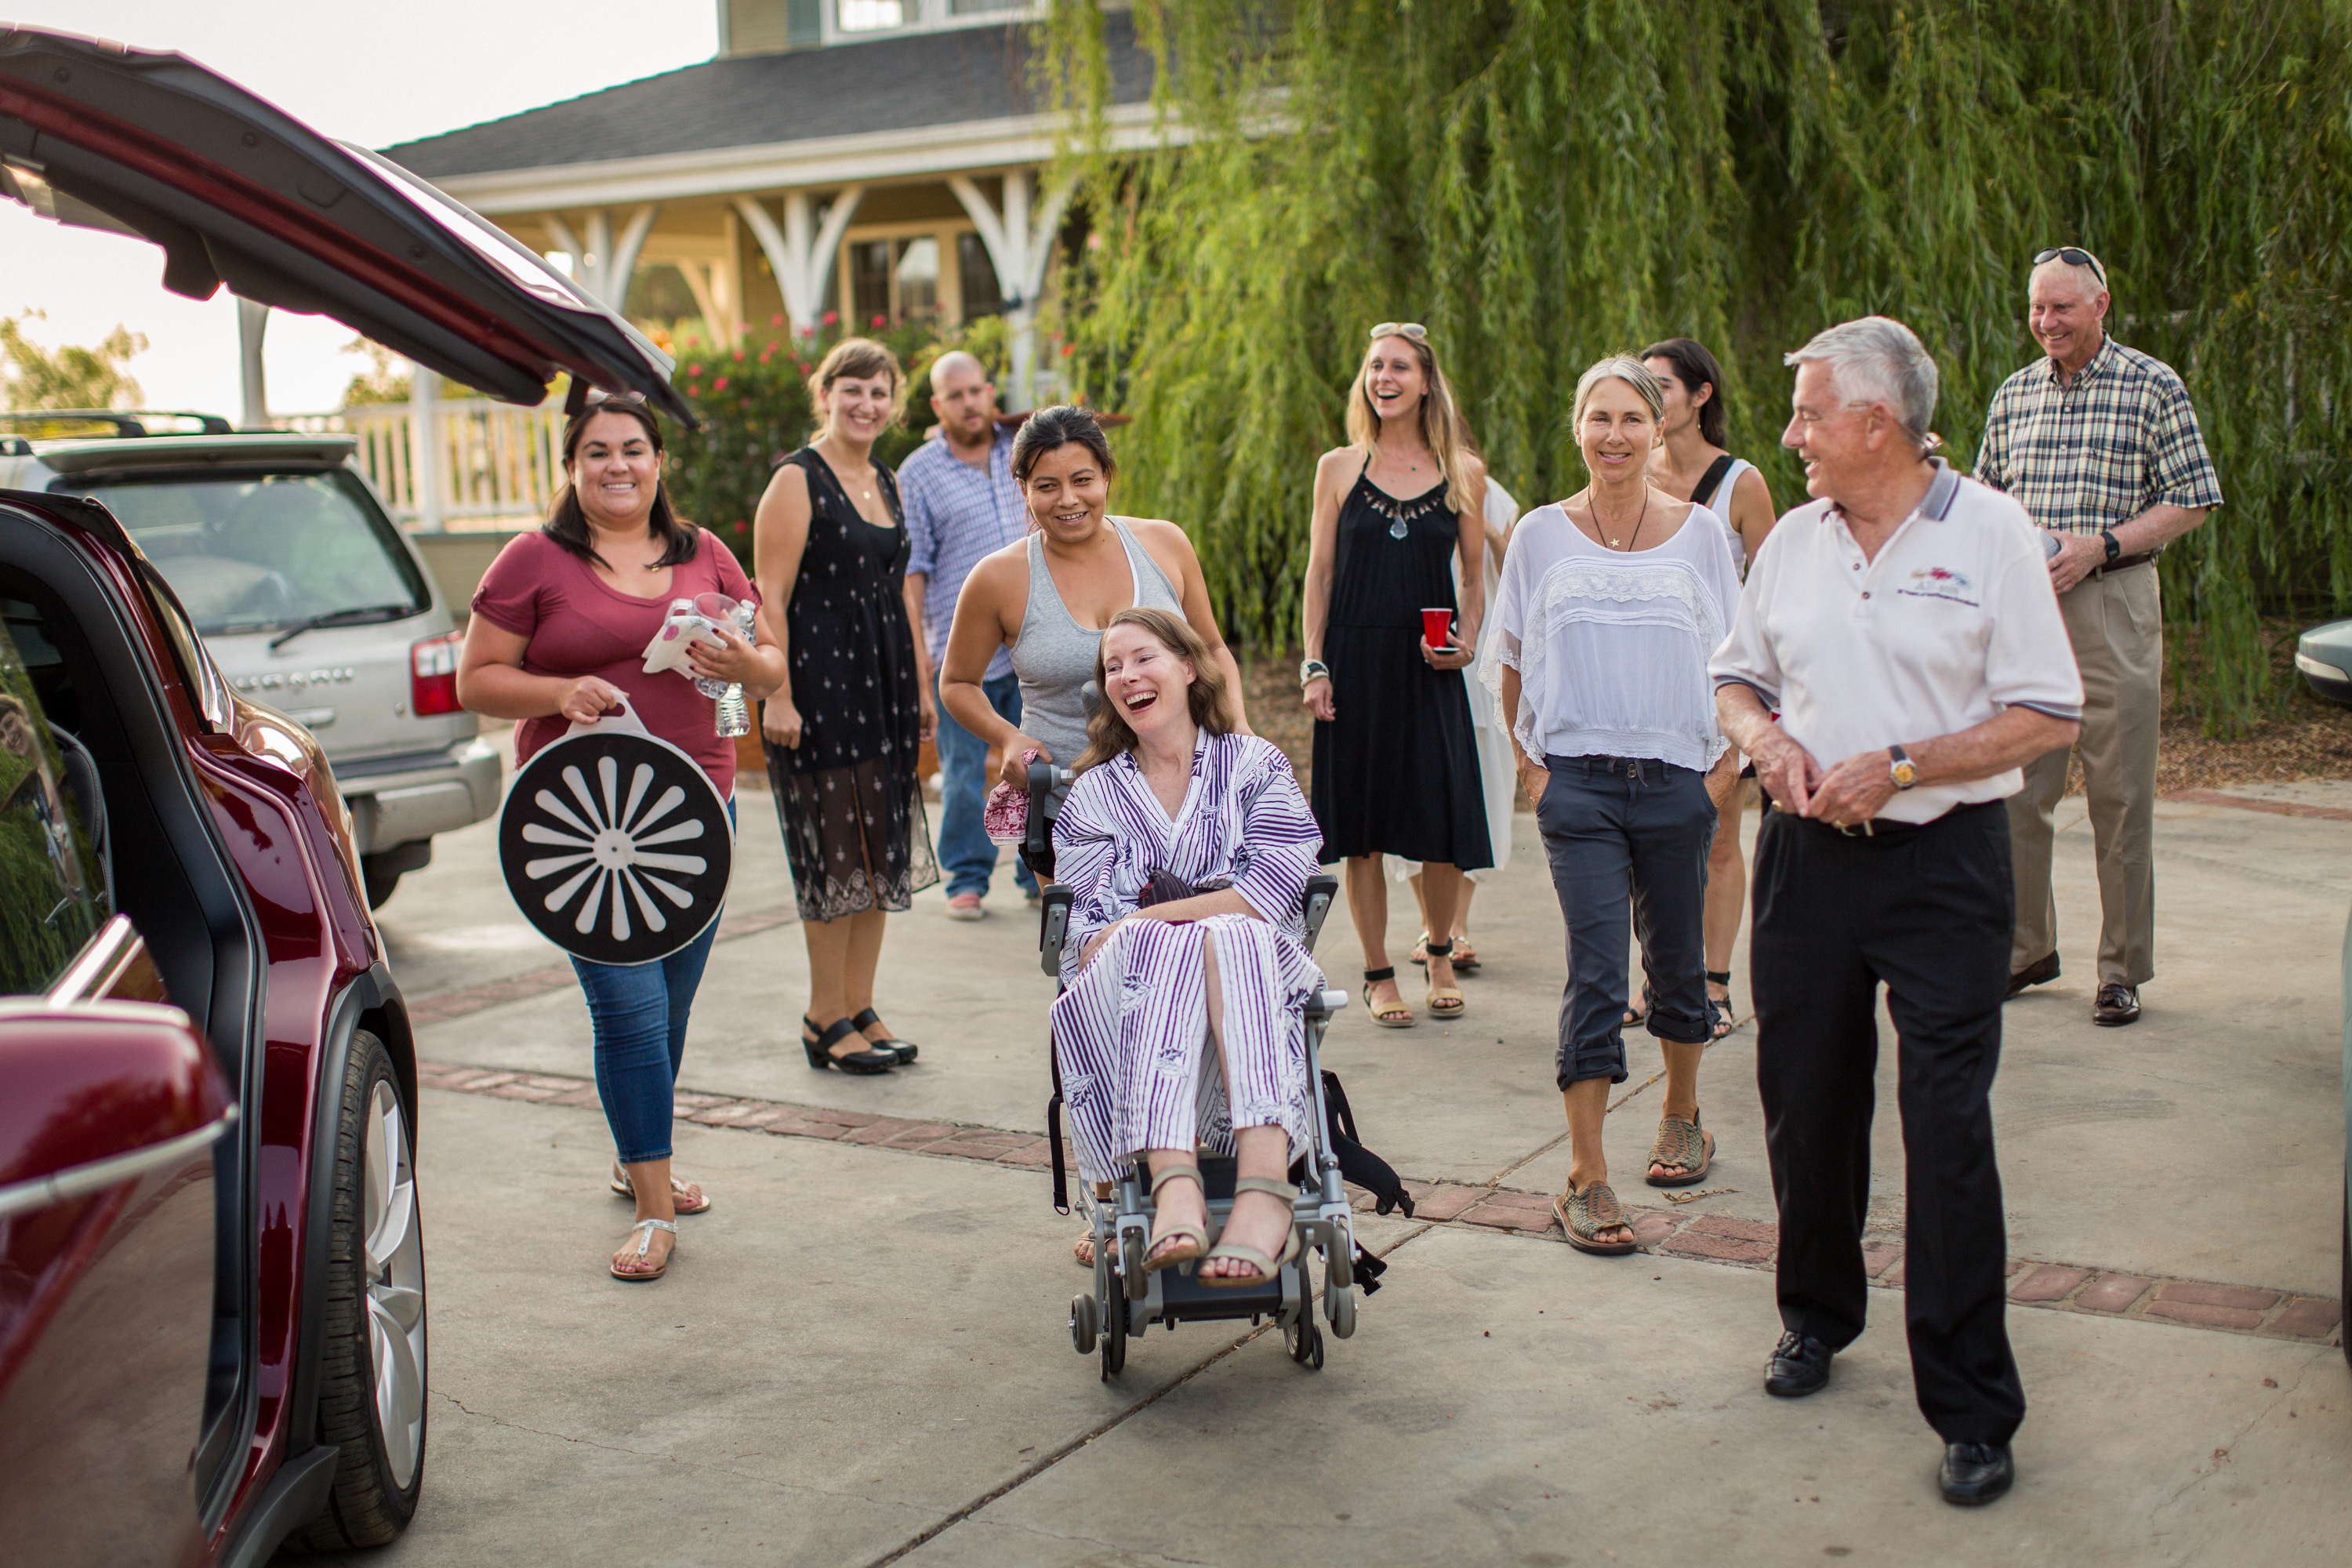 This July 24, 2016 photo provided by Niels Alpert, Betsy Davis, center, is accompanied by friends and family for her first ride in a friends new Tesla to a hillside to end her life during a "Right To Die Party" in Ojai, Calif.  In early July, Davis emailed her closest friends and family to invite them to a two-day celebration, telling them: "These circumstances are unlike any party you have attended before, requiring emotional stamina, centeredness, and openness.  And one rule: No crying. " The 41-year-old woman diagnosed with ALS,  held the party to say goodbye before becoming one of the first California residents to take life-ending drugs under a new law that gave such an option to the terminally ill. (Niels Alpert via AP)